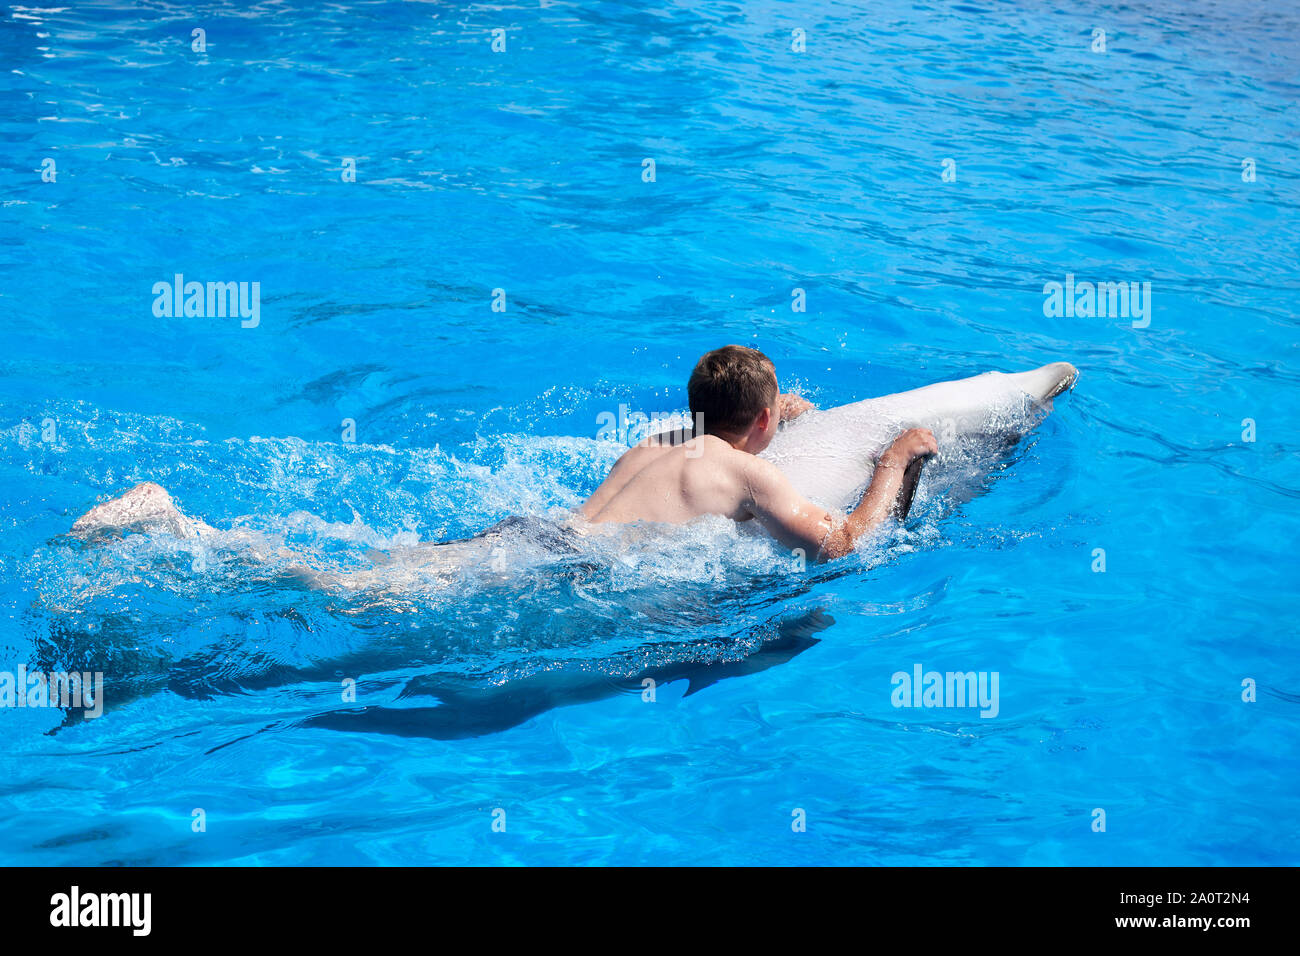 A young man is riding dolphin, boy swimming with dolphin on the back in blue water in water pool, sea, ocean, dolphin saves a man Stock Photo